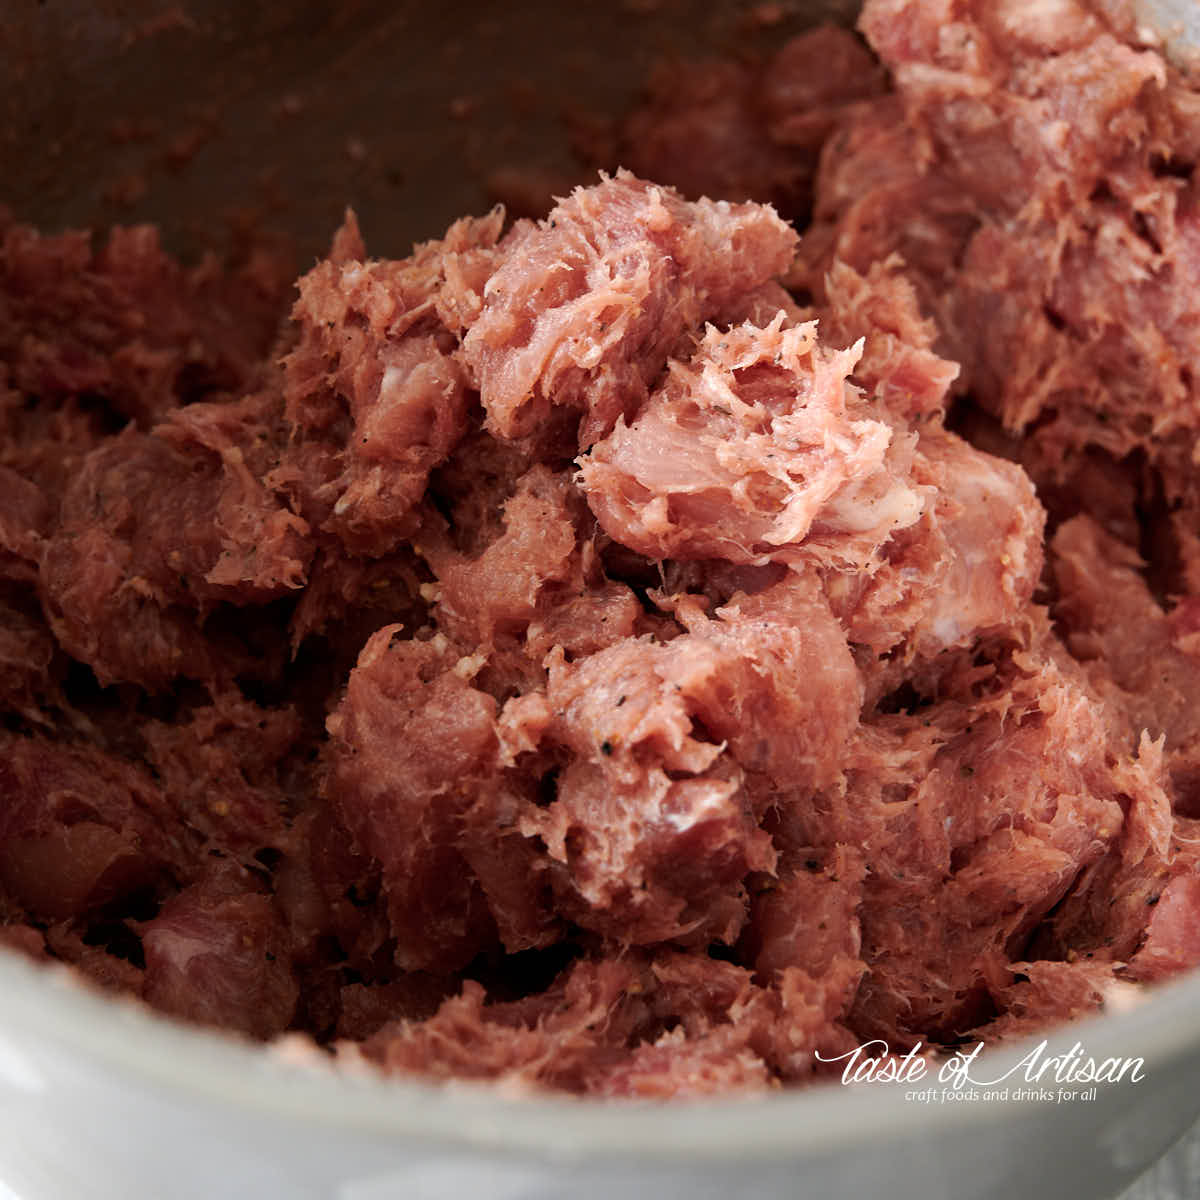 Meat for kielbasa fully mixed in a bowl. Close up view.